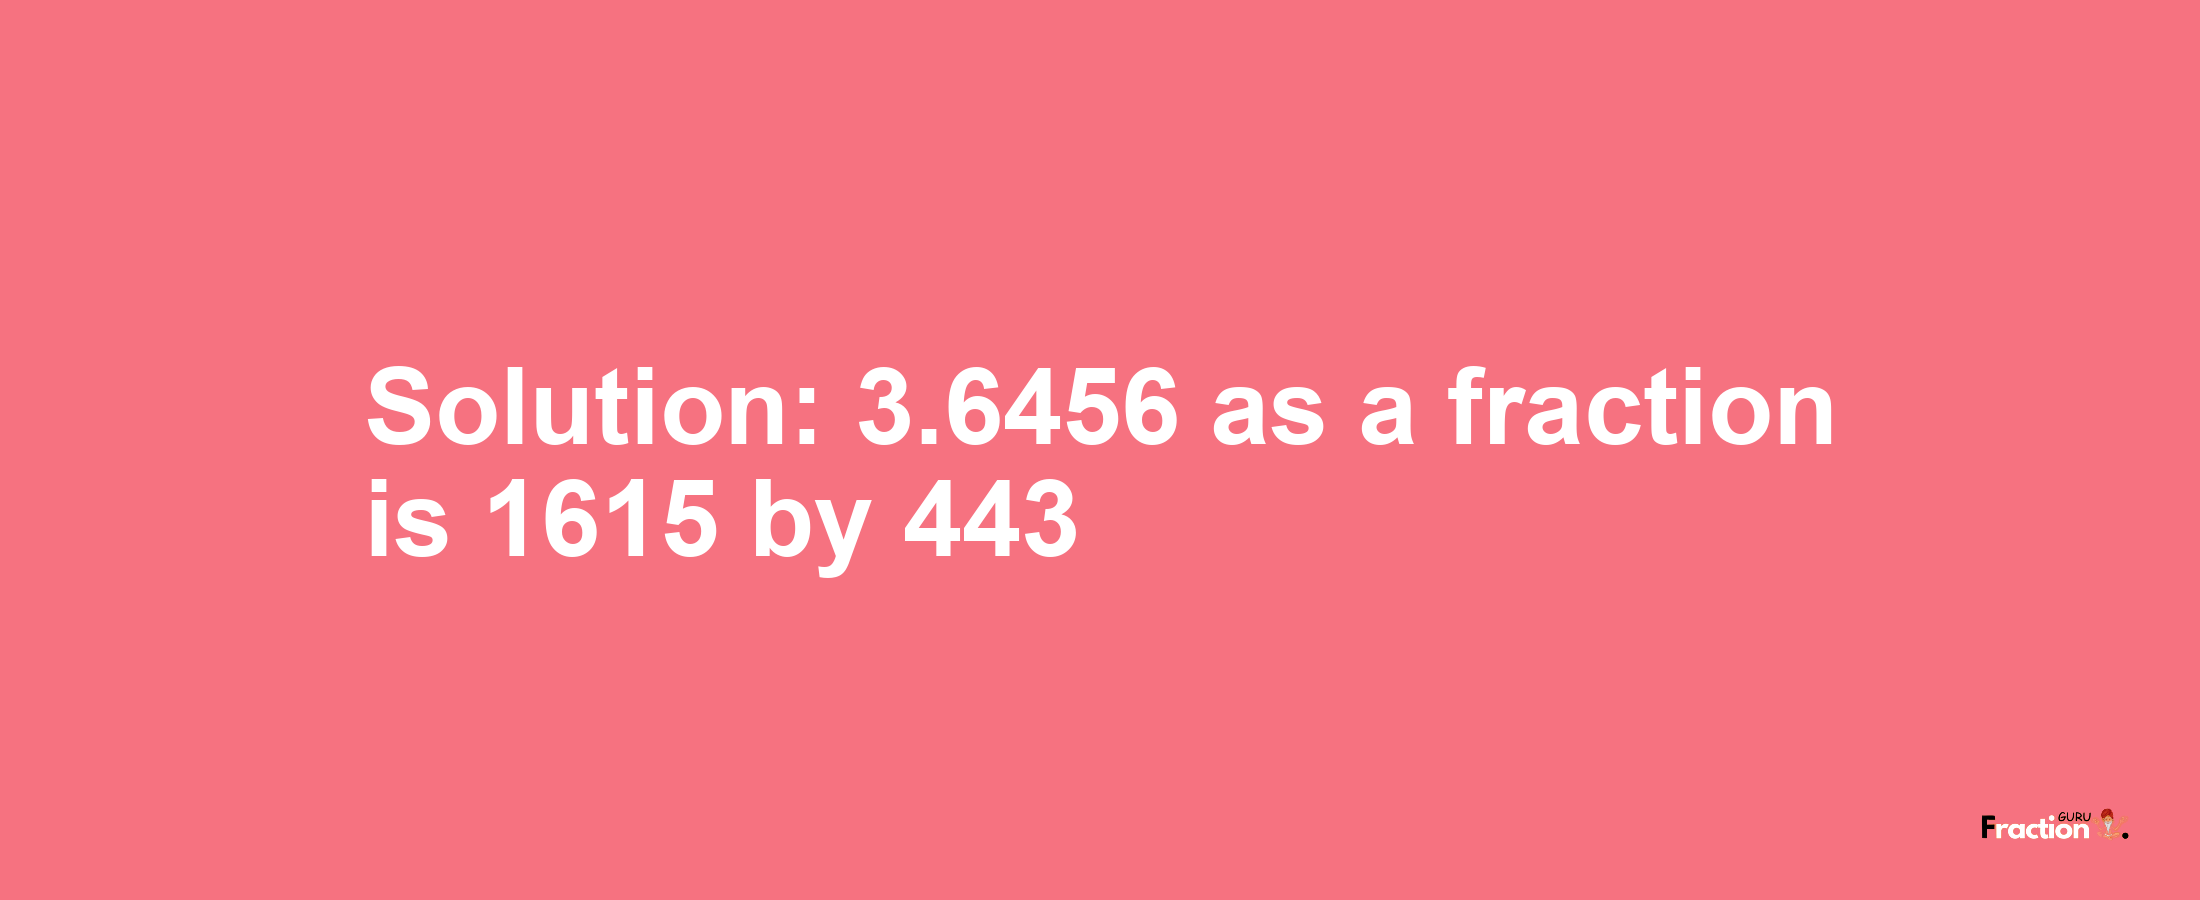 Solution:3.6456 as a fraction is 1615/443